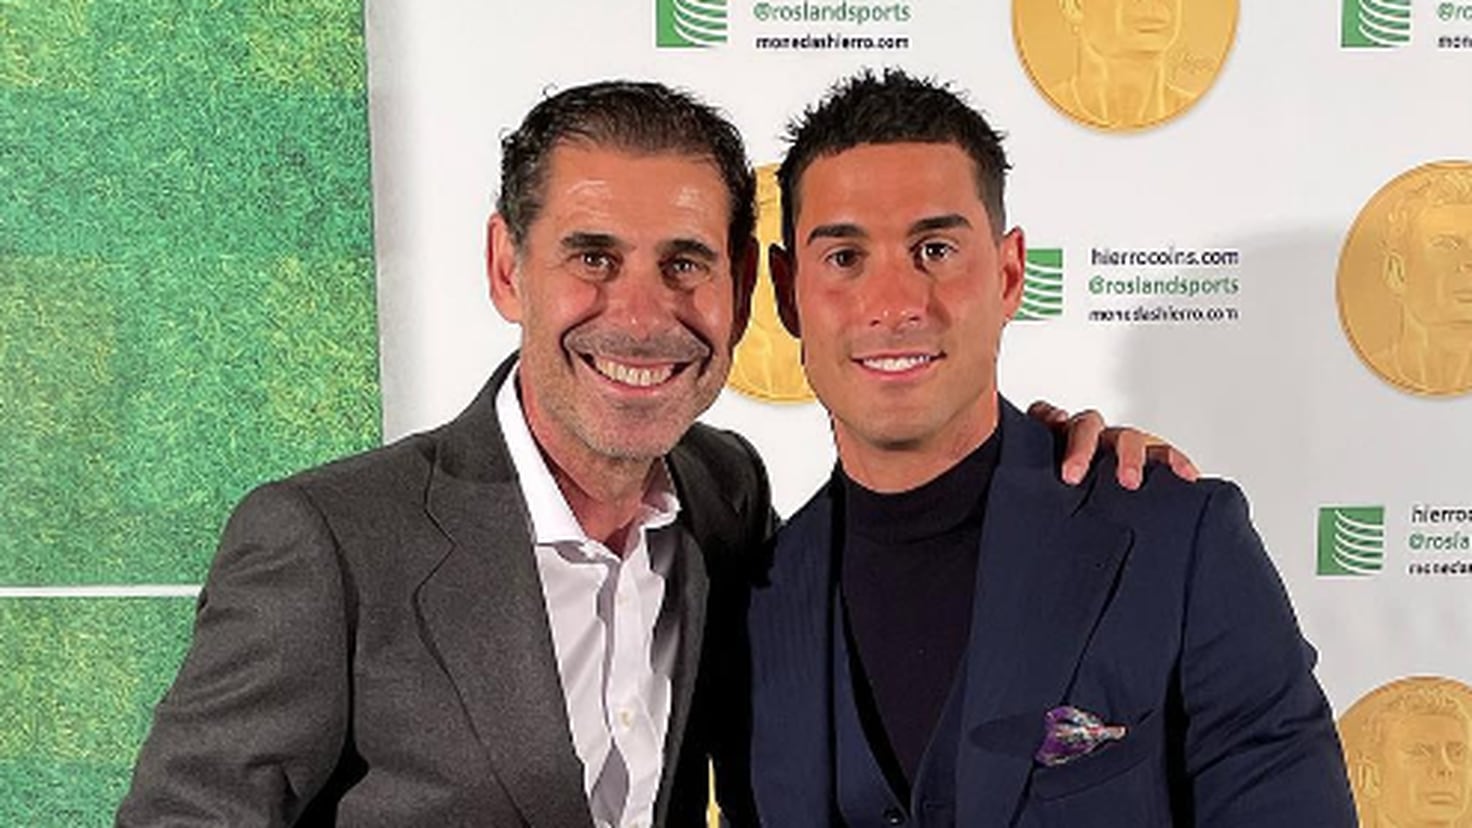 Fernando Hierro will be a grandfather for the first time, at 55 years old
